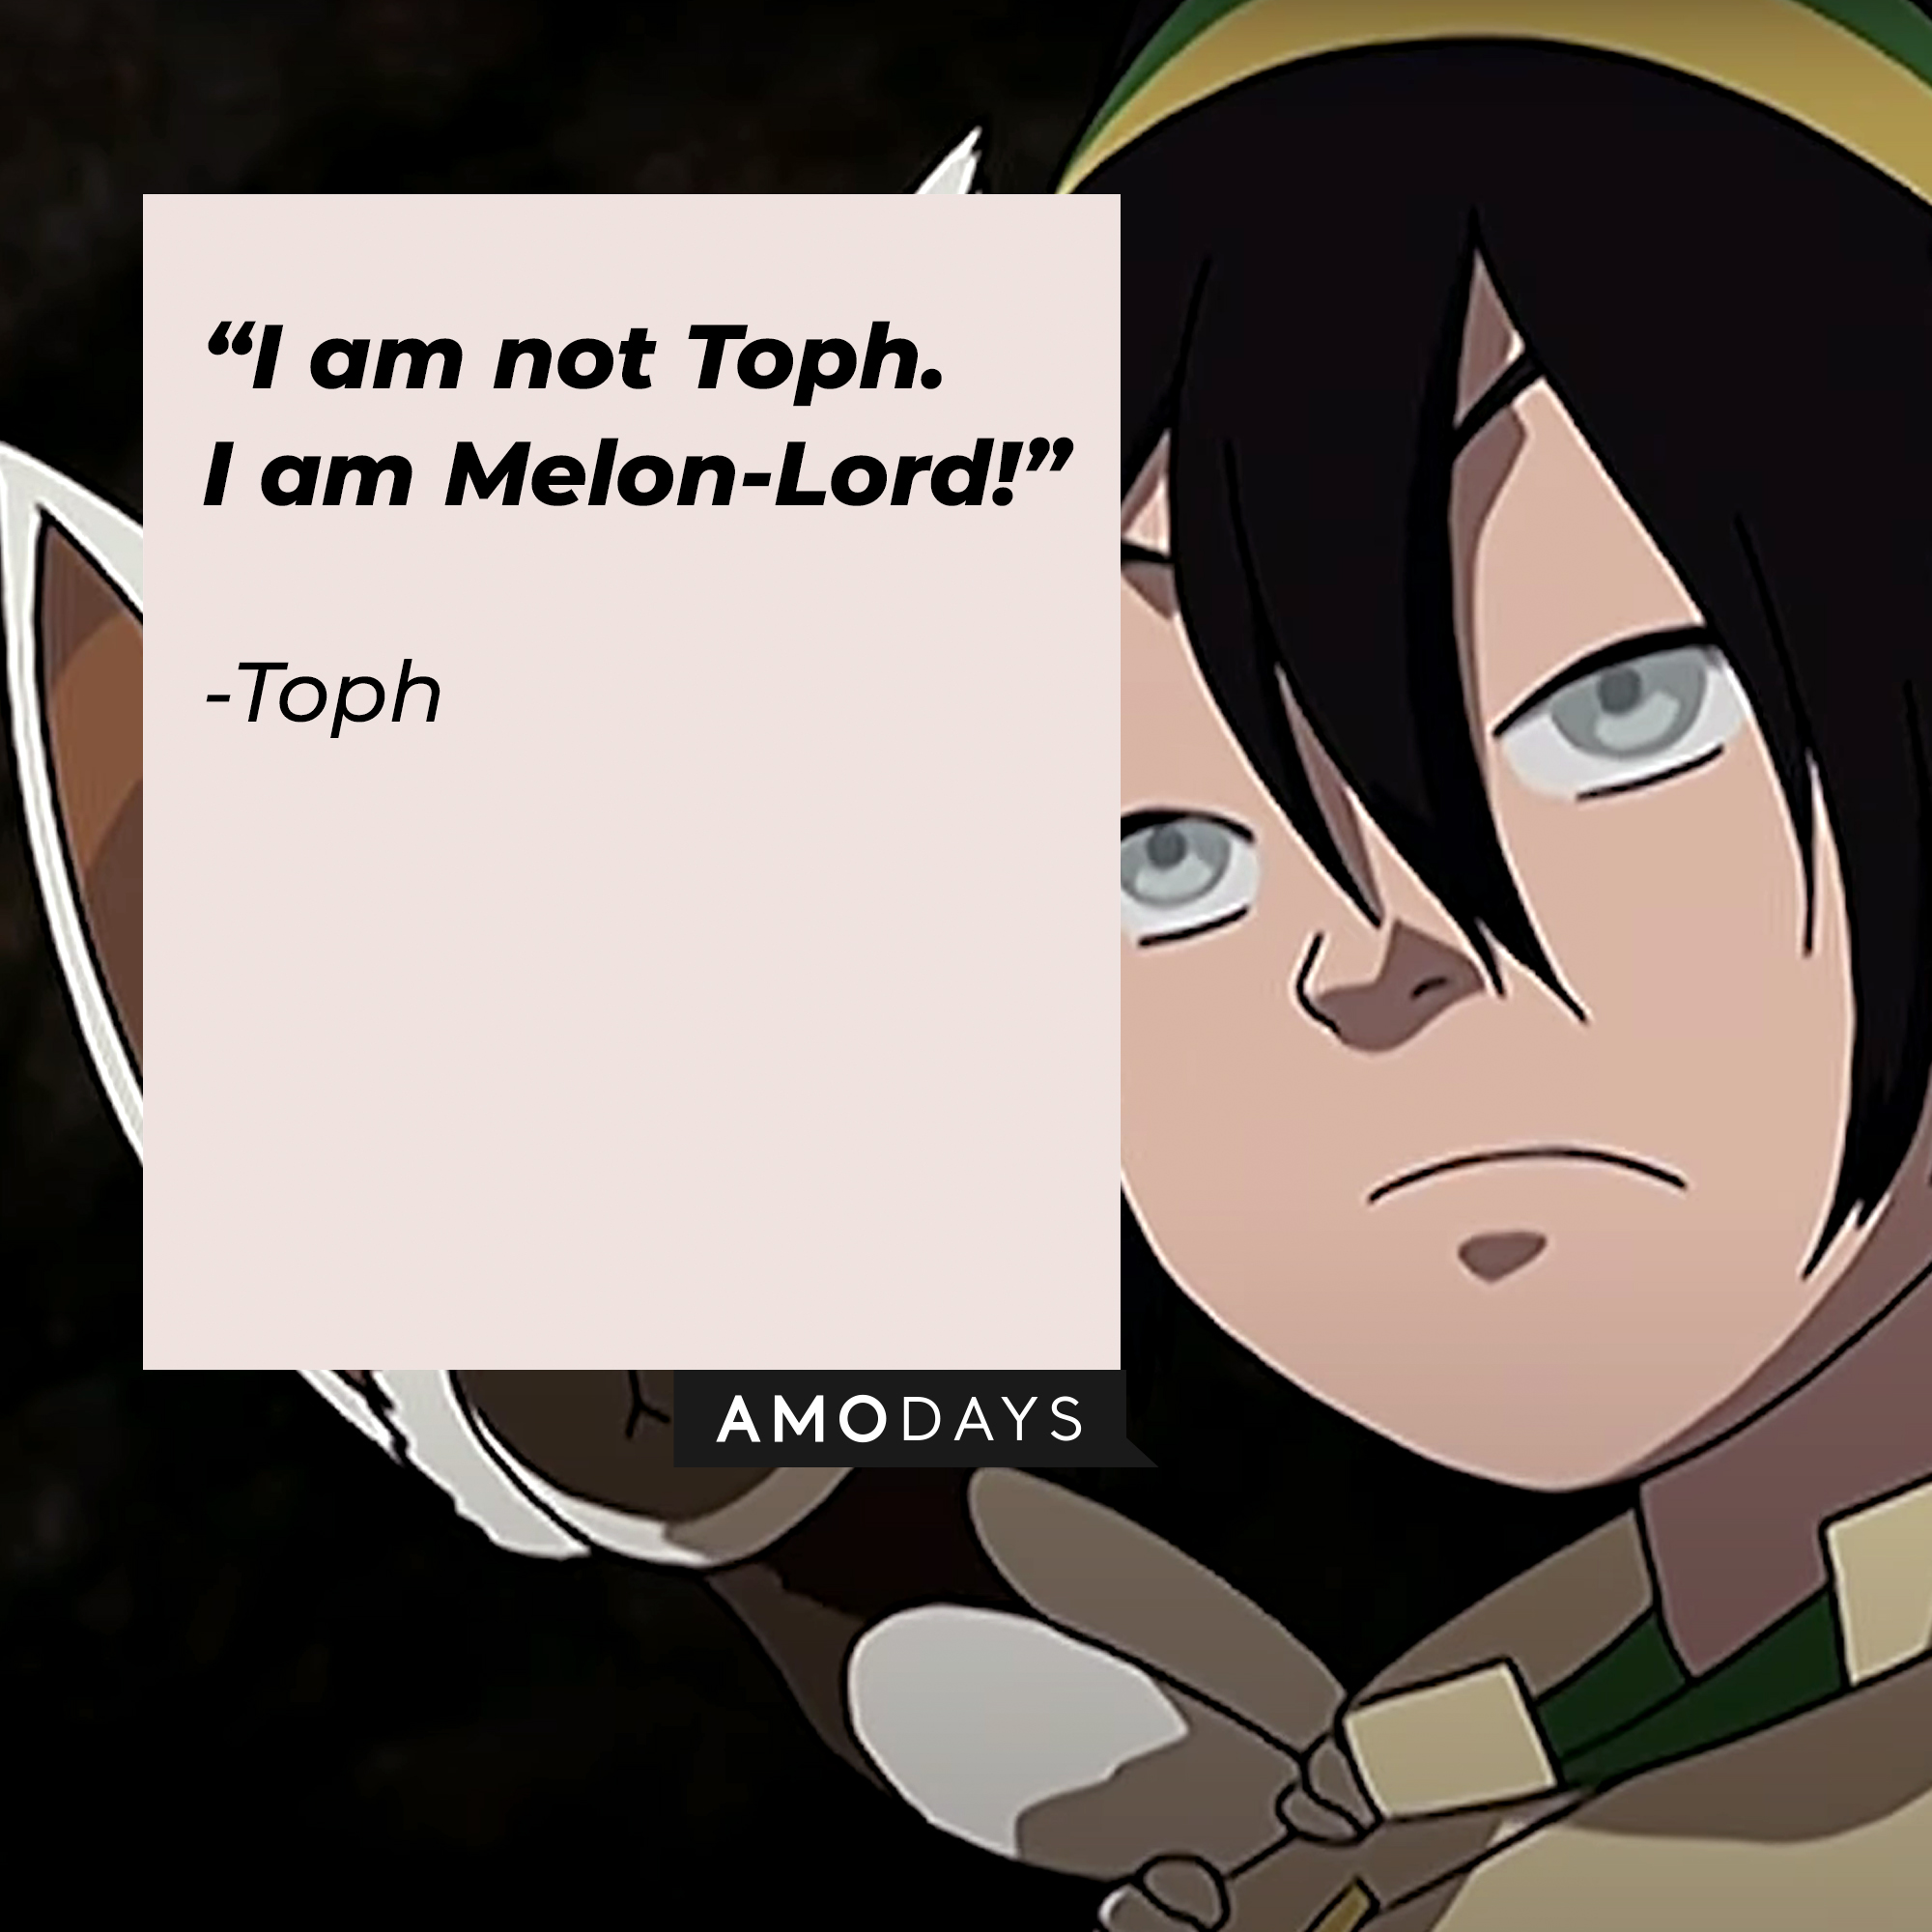 Toph's quote: “I am not Toph. I am Melon-Lord!” | Source: youtube.com/TeamAvatar